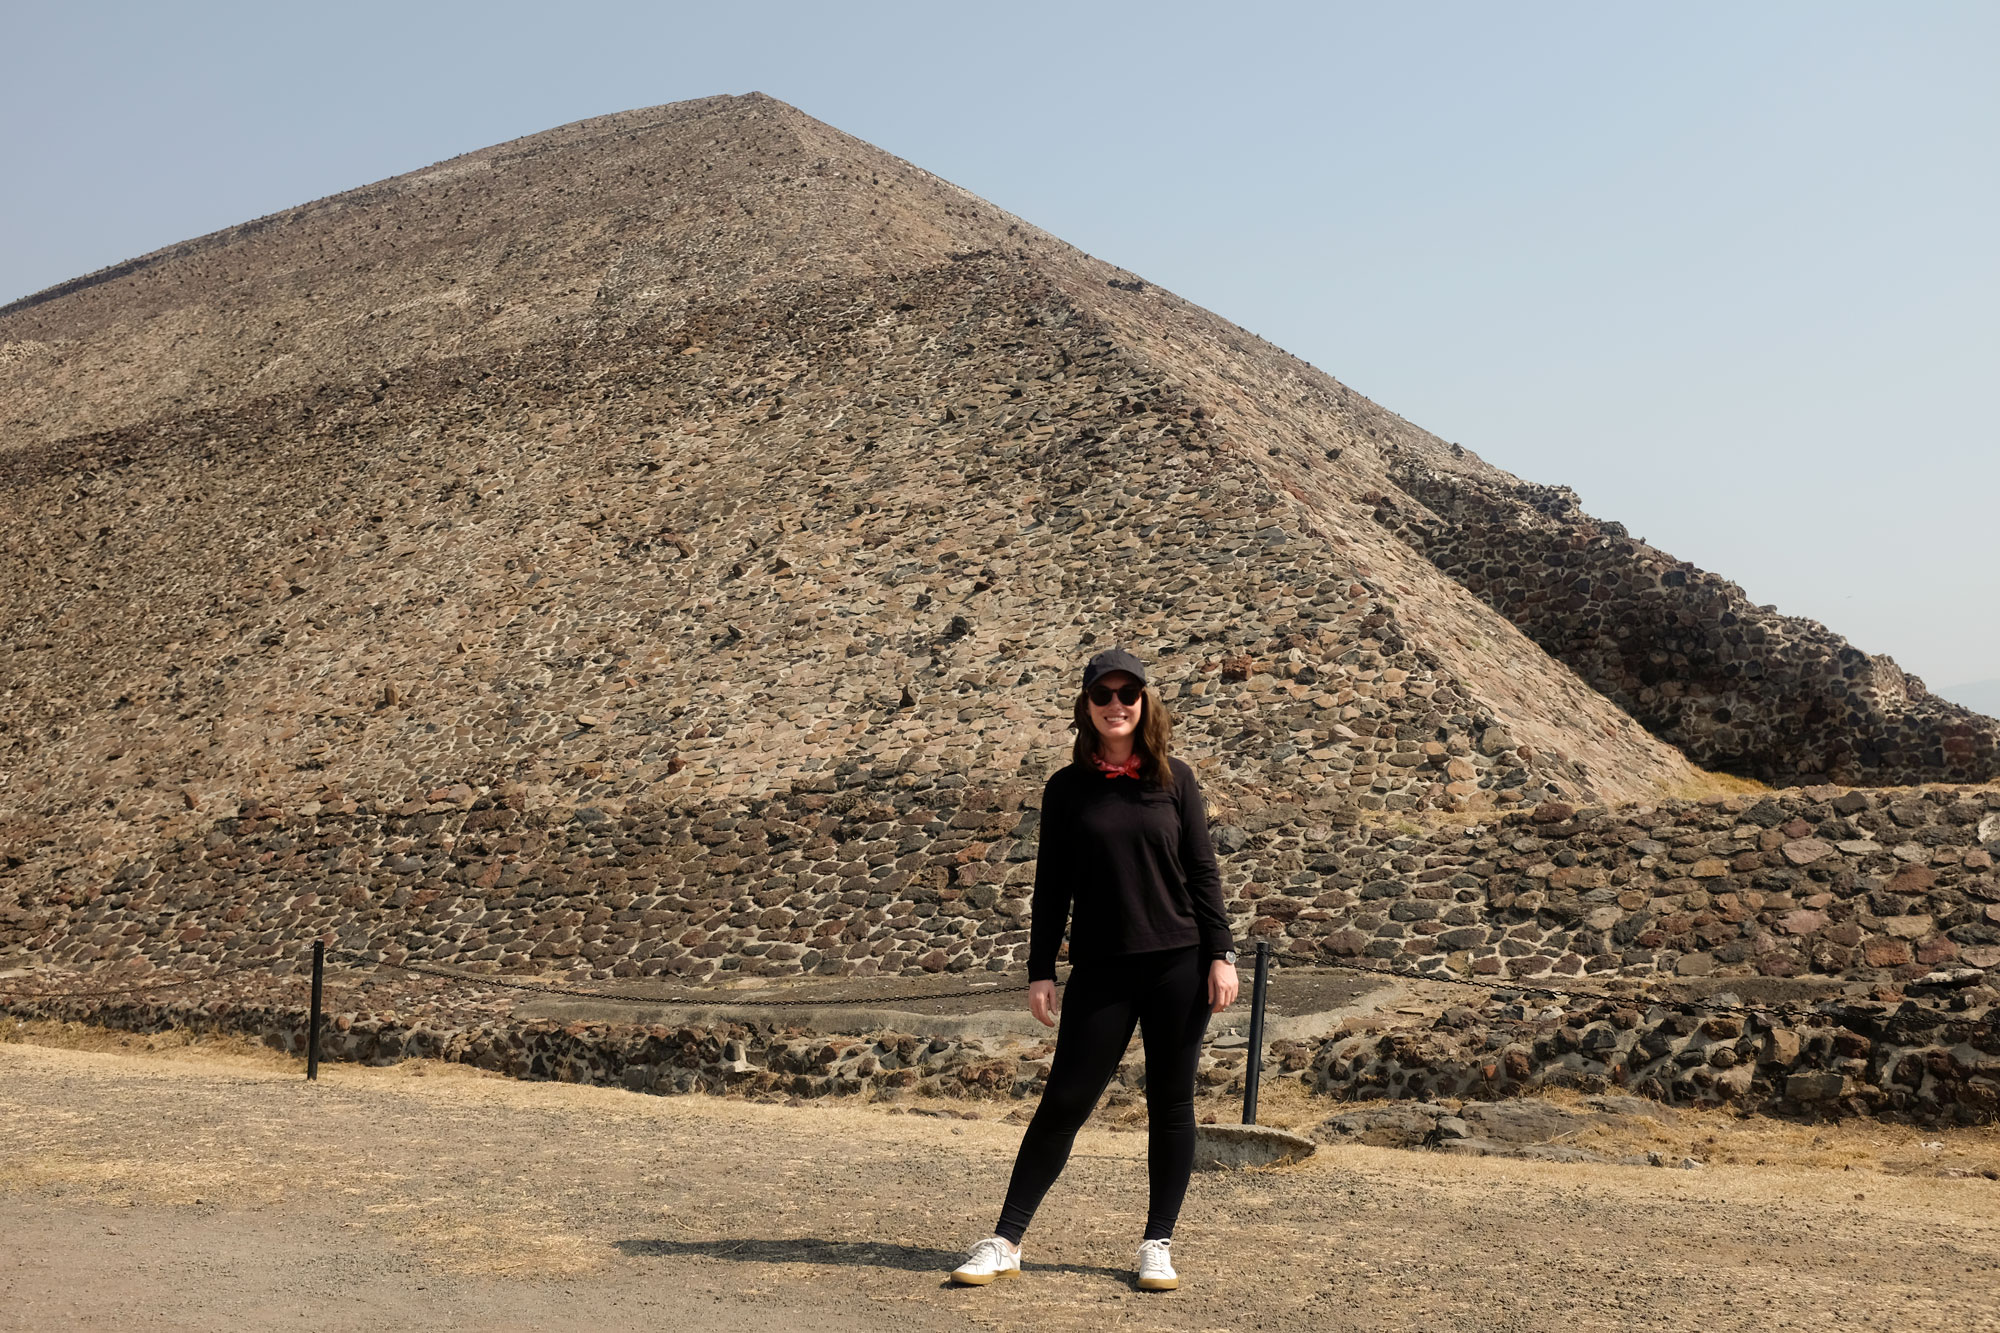 Alyssa standing in front of the pyramid of the sun in a black hat, sweatshirt, and leggings with a red bandana and white sneakers